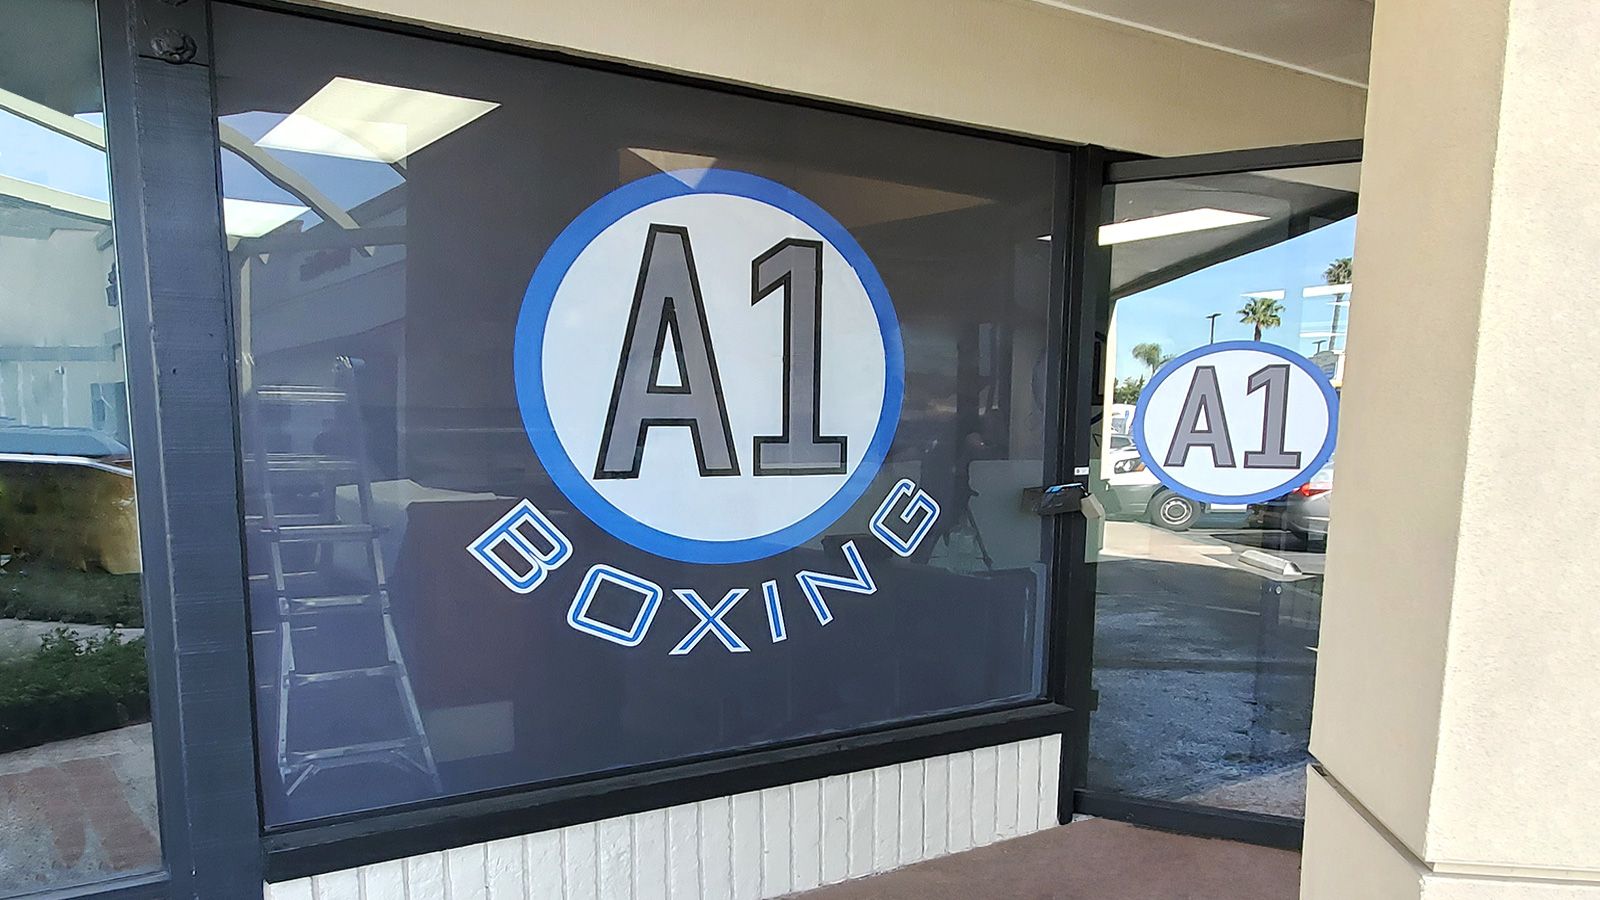 A1 boxing window decals